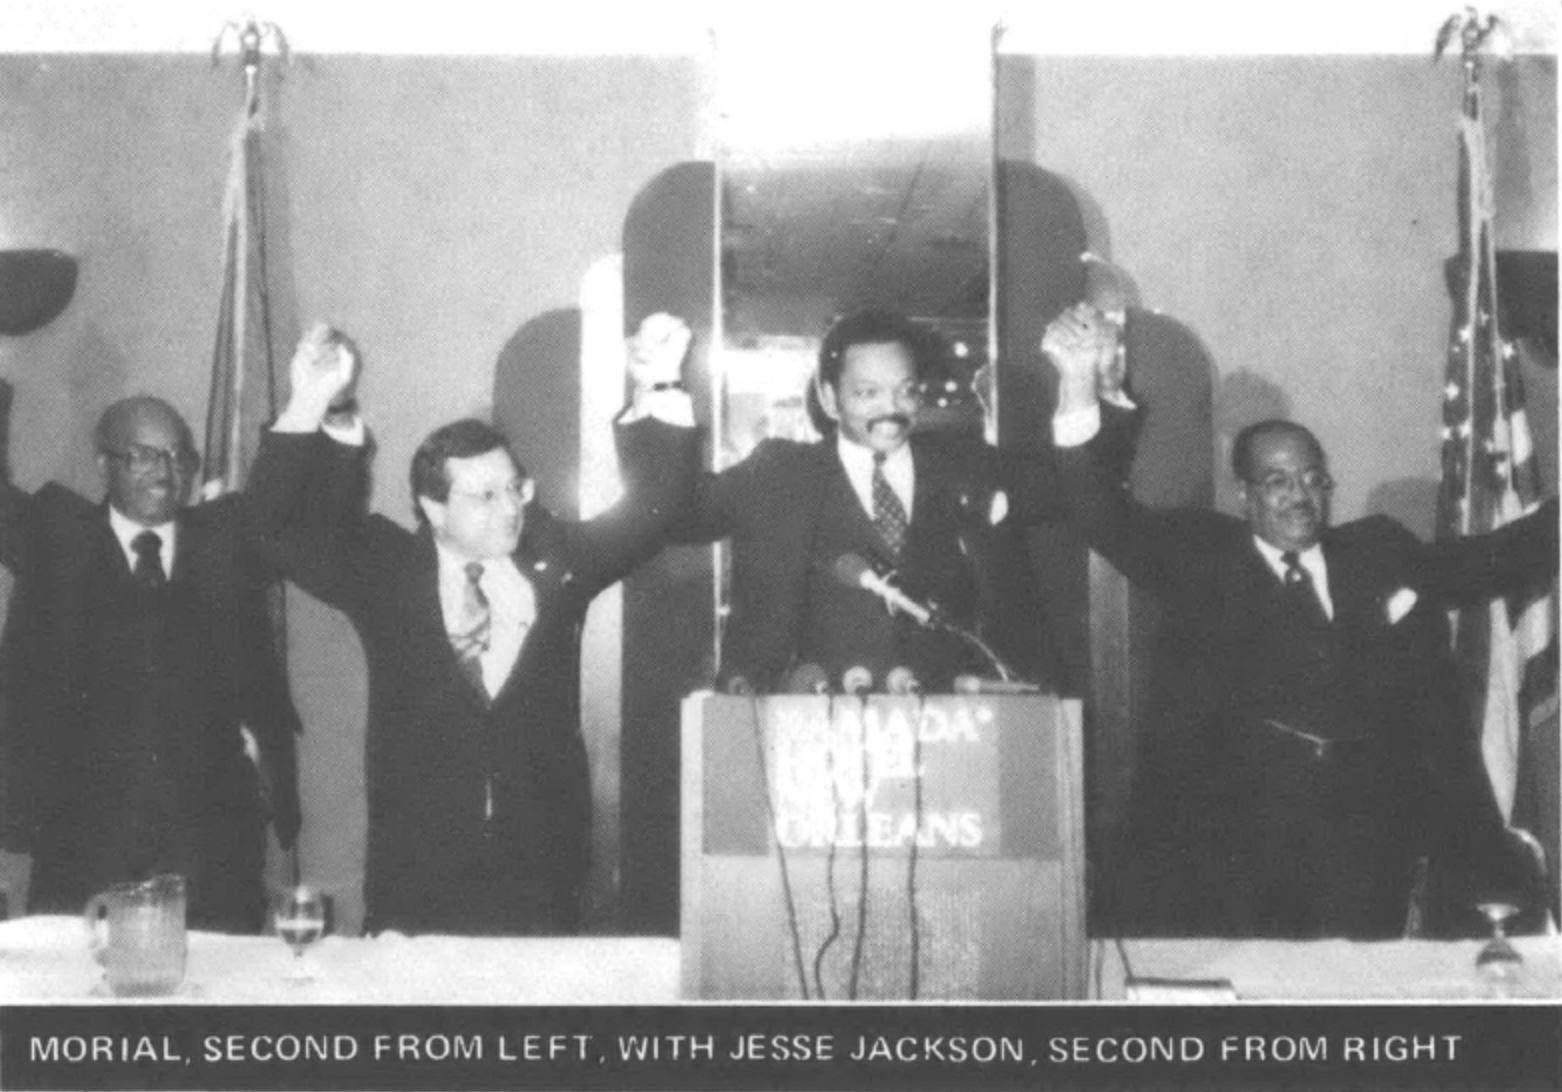 men holding and raising their hands, including Morial and Jesse Jackson